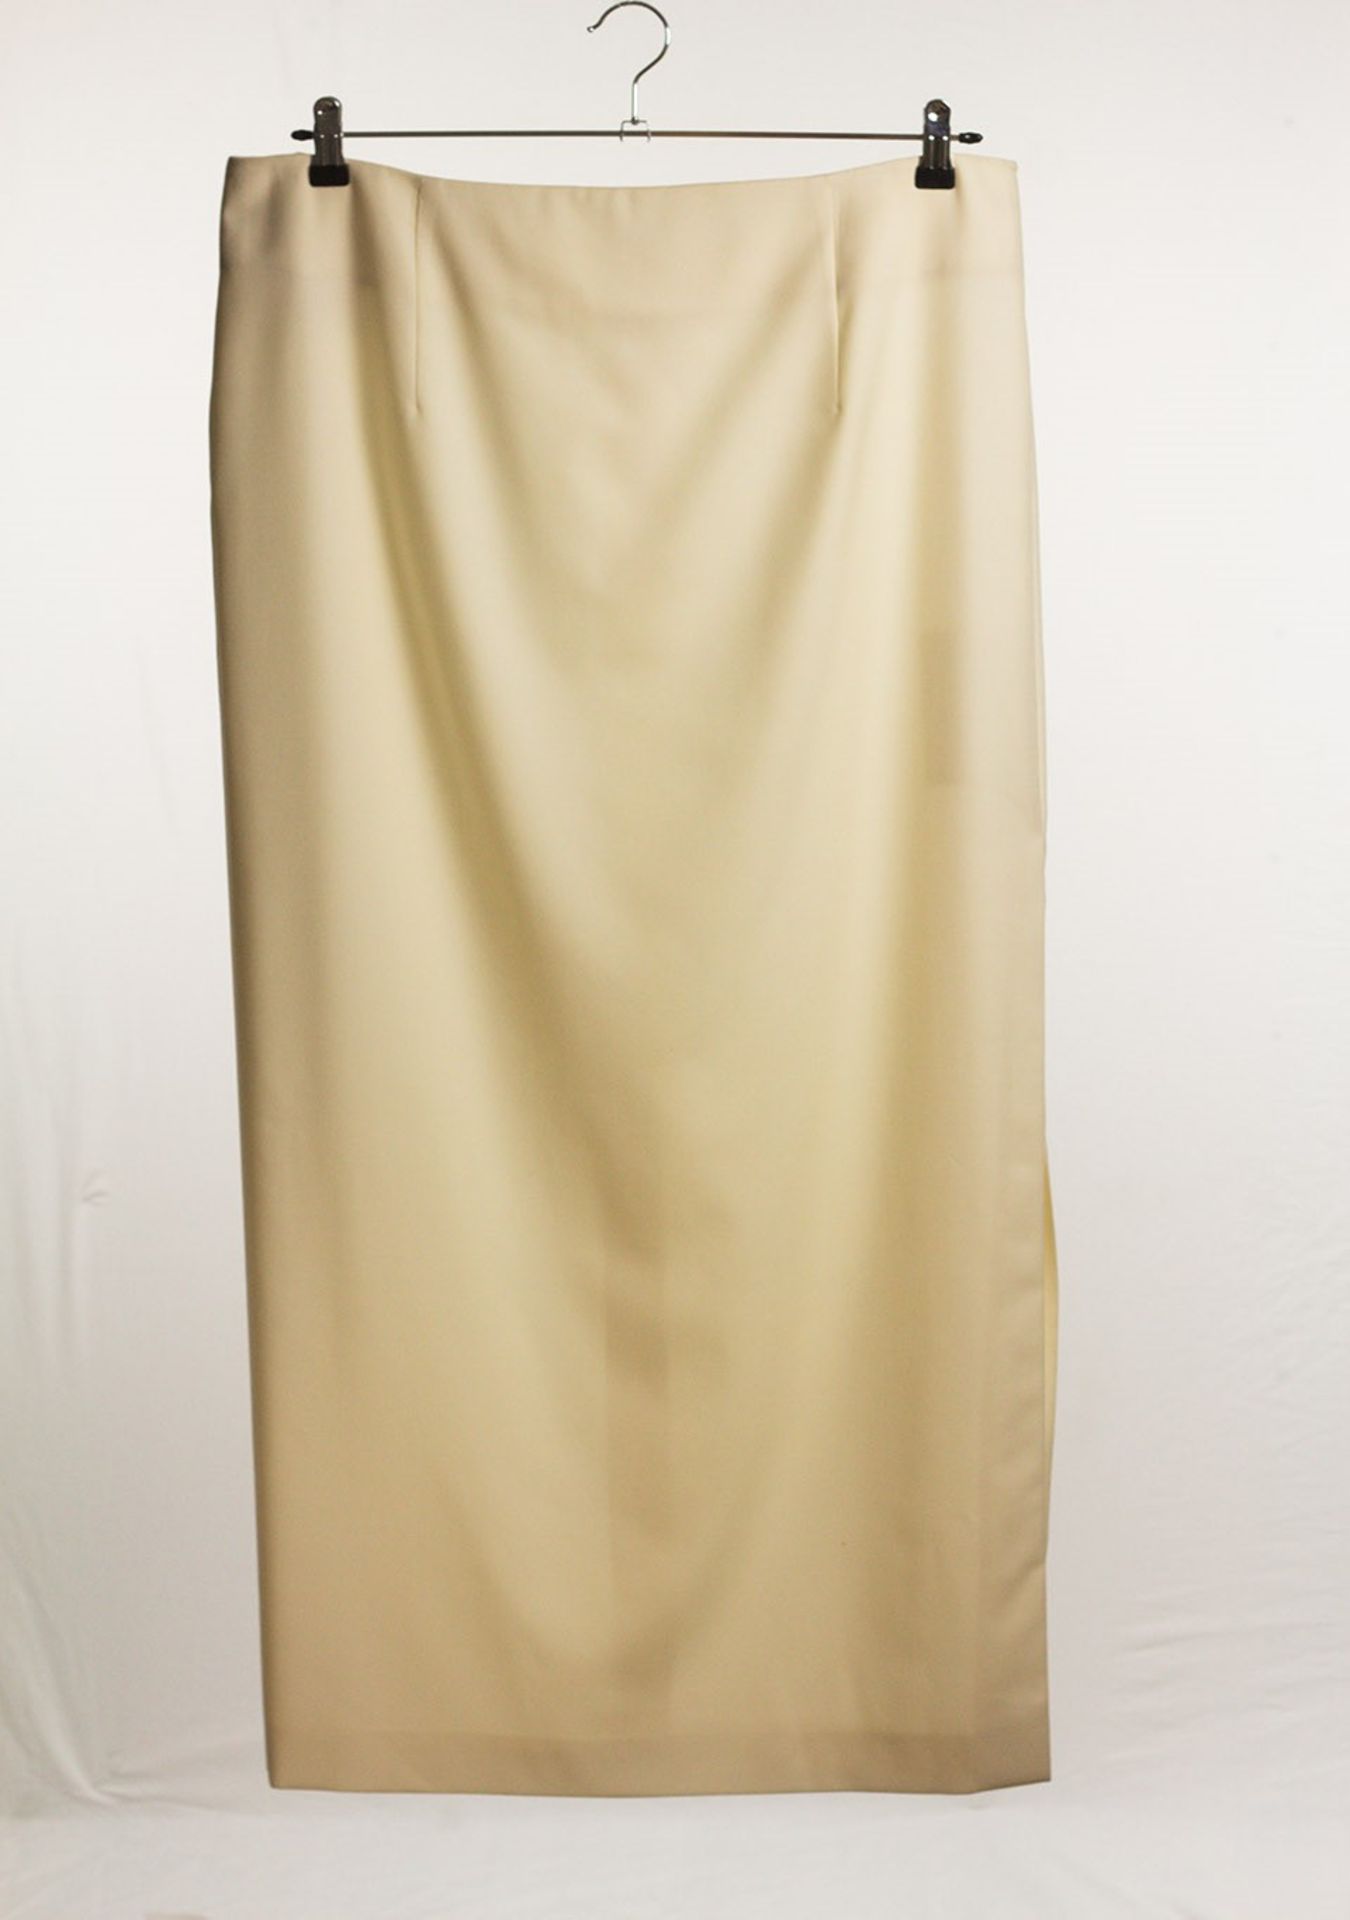 1 x Boutique Le Duc Cream Skirt - Size: 22 - Material: 100% Wool - From a High End Clothing Boutique - Image 4 of 10